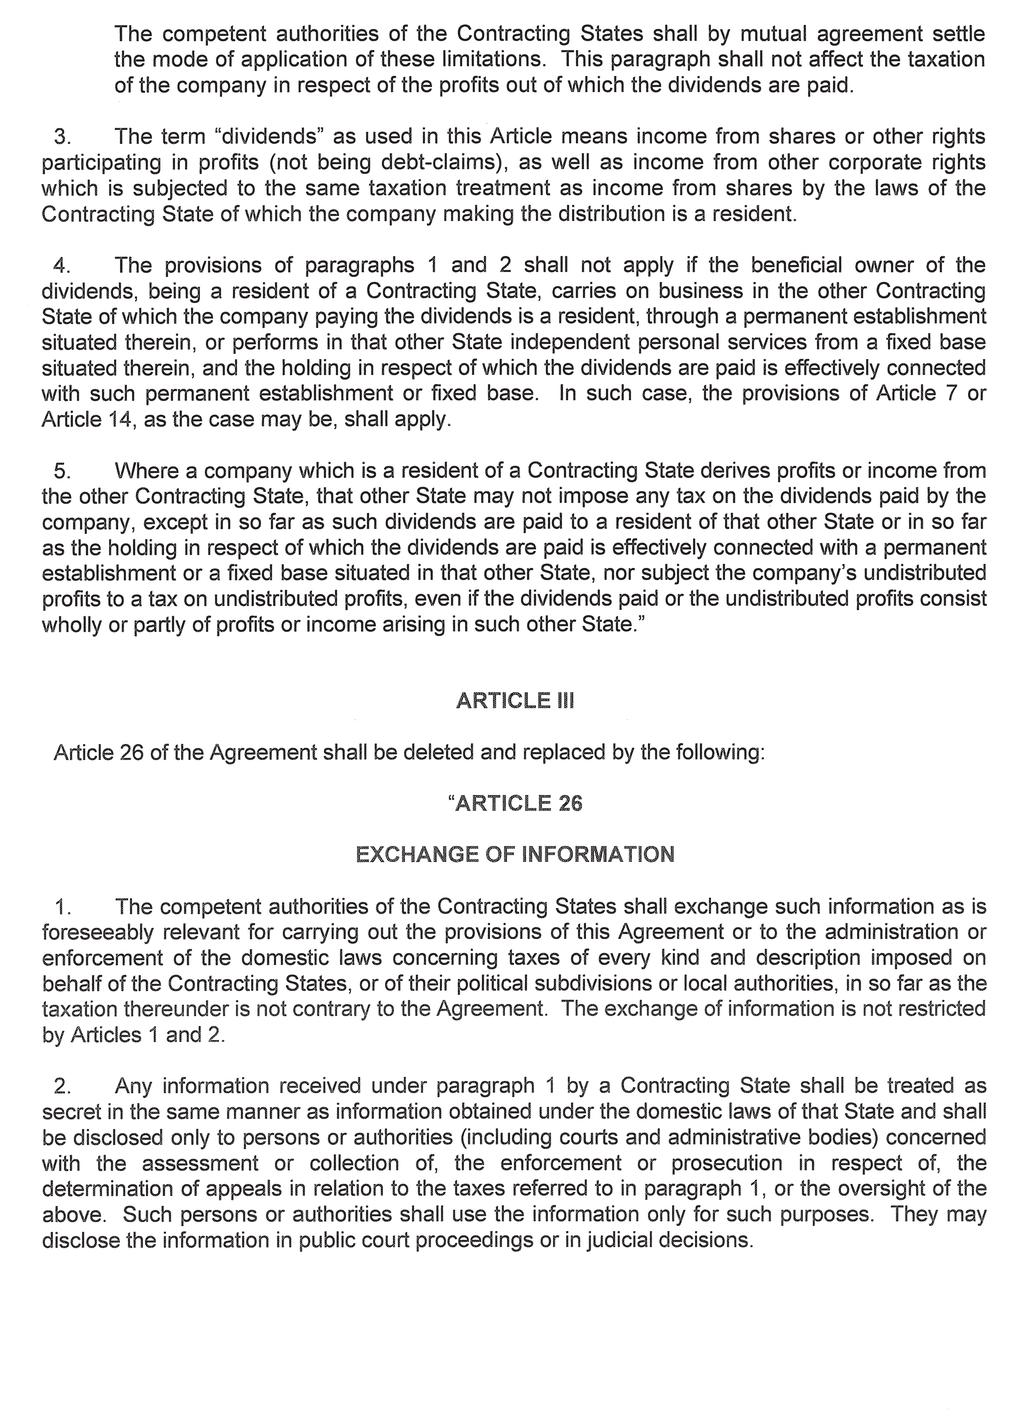 8 No. 39295 GOVERNMENT GAZETTE, 16 OCTOBER 2015 The competent authorities of the Contracting States shall by mutual agreement settle the mode of application of these limitations.